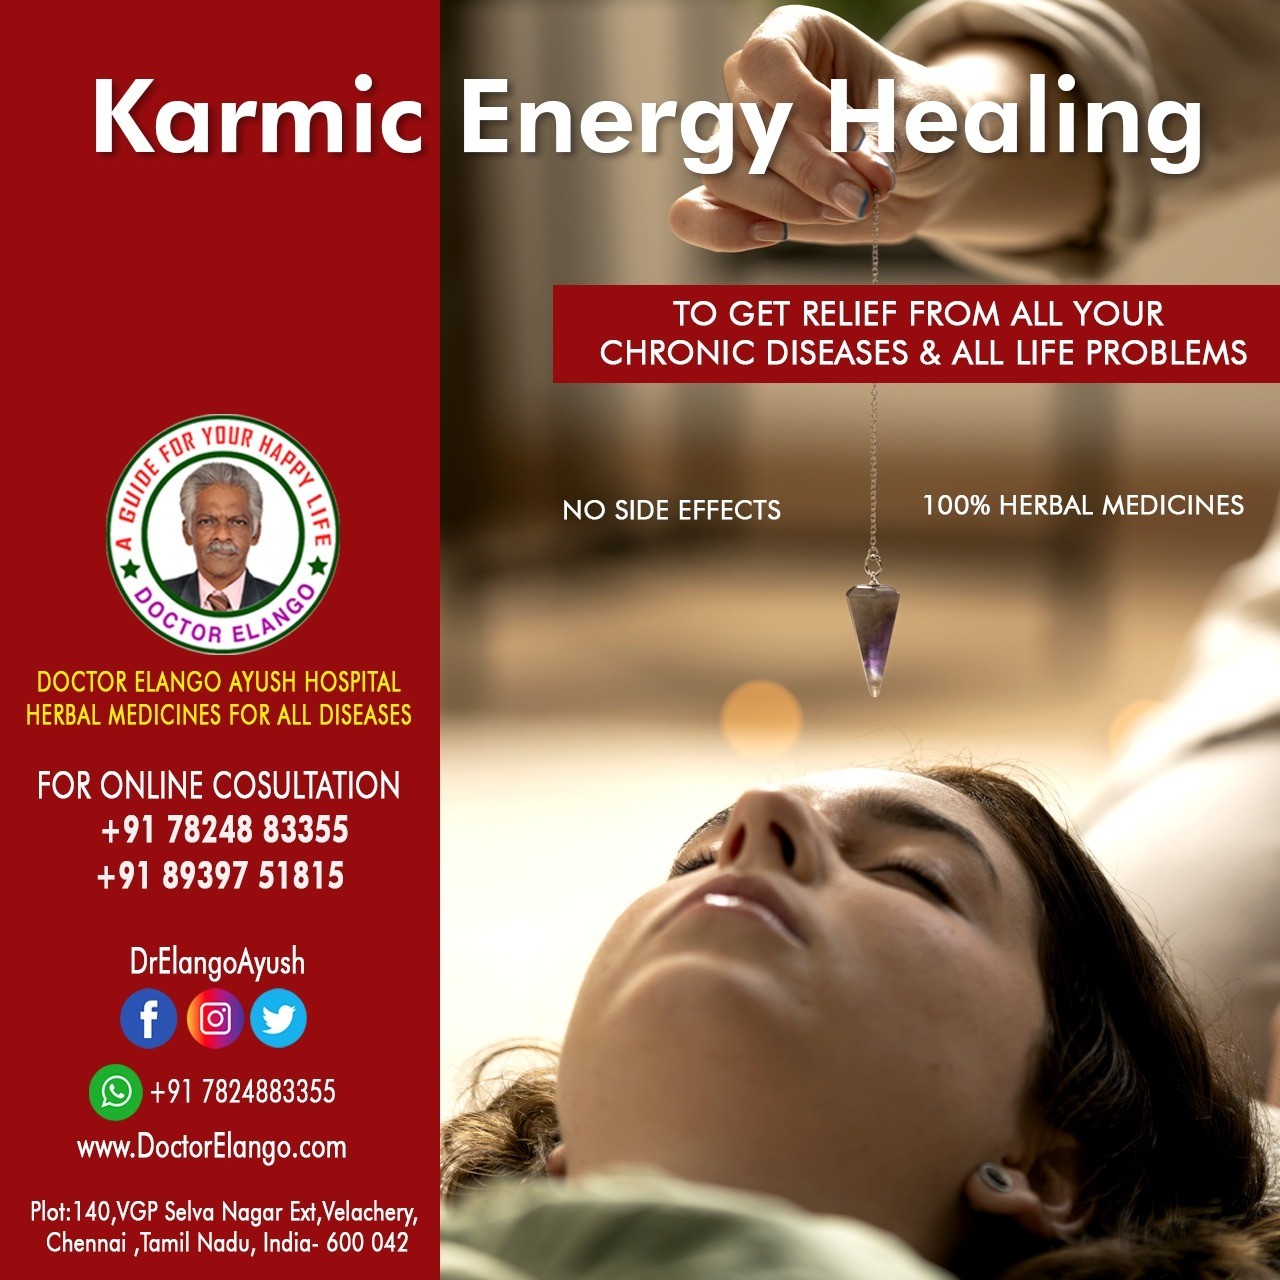 Acupuncture Therapy, Homeopathic, Reiki Therapy, Ayurvedic; Exp: More than 15 year